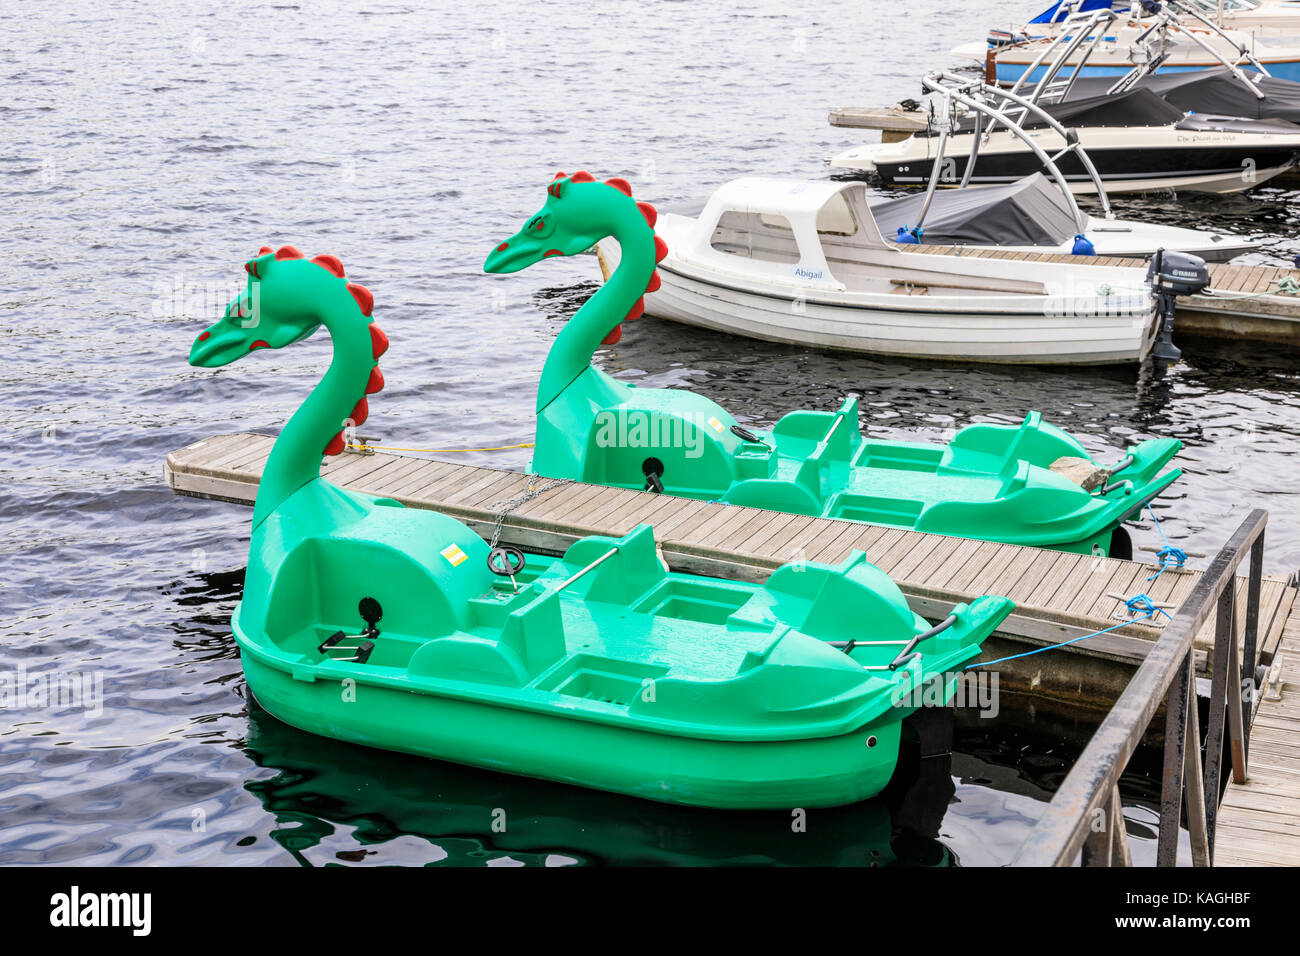 Pair of green Nessie pedalos or paddle boats Stock Photo